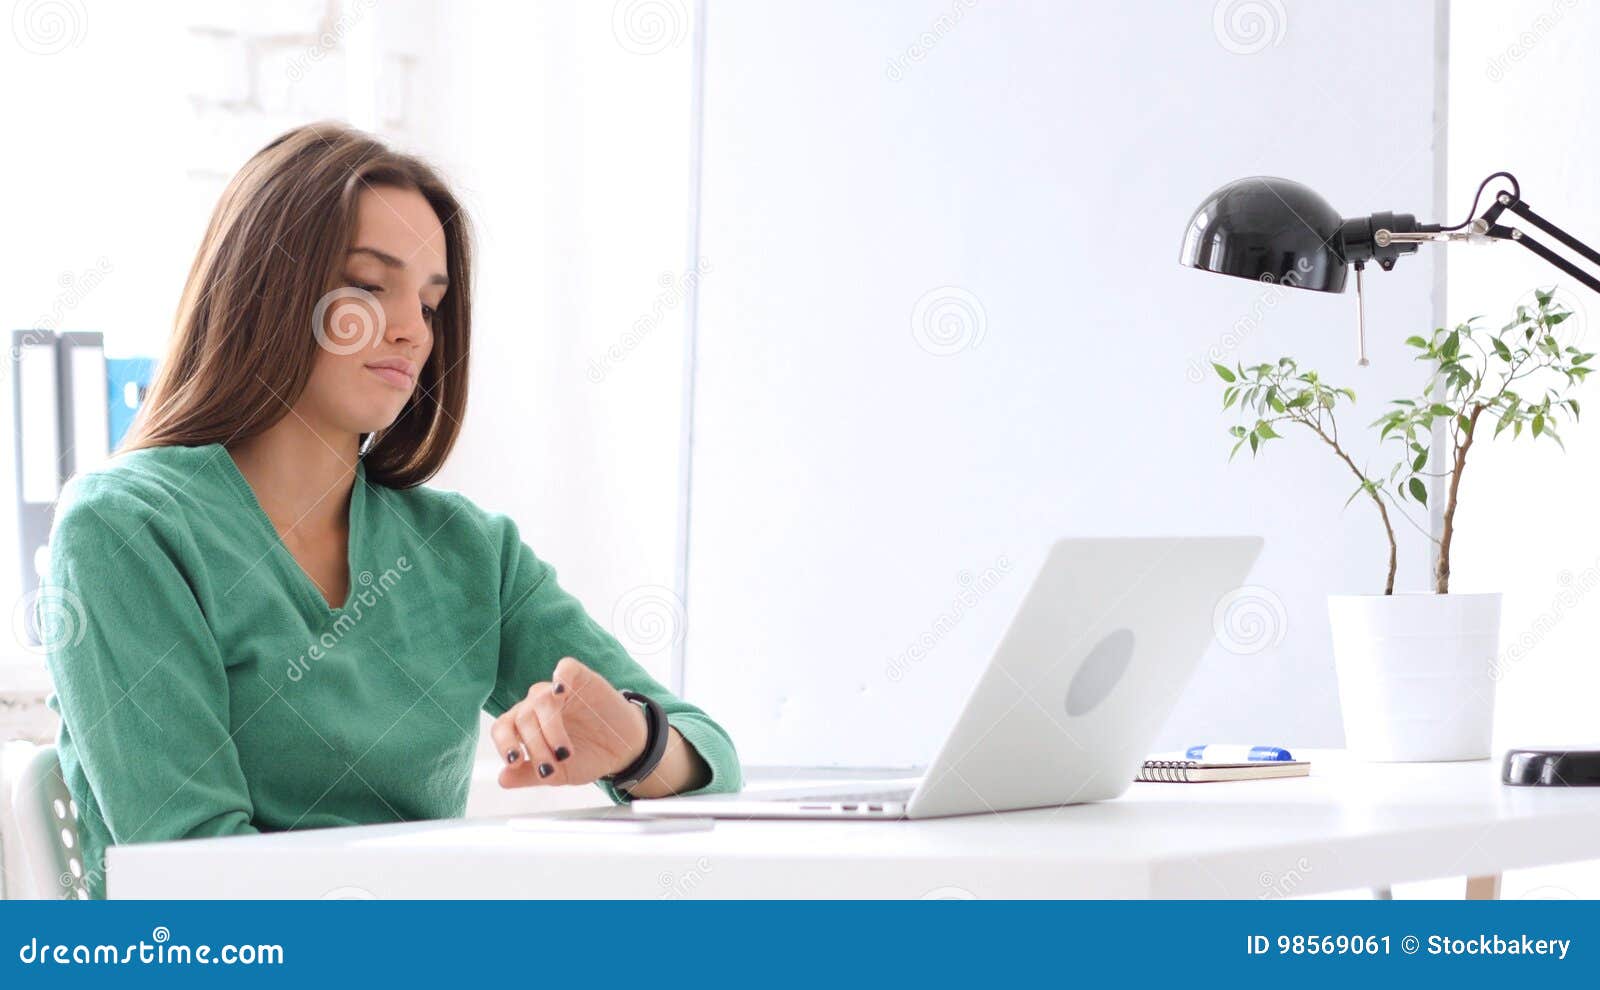 Woman Watching Time on Watch while Waiting in Office Stock Image ...